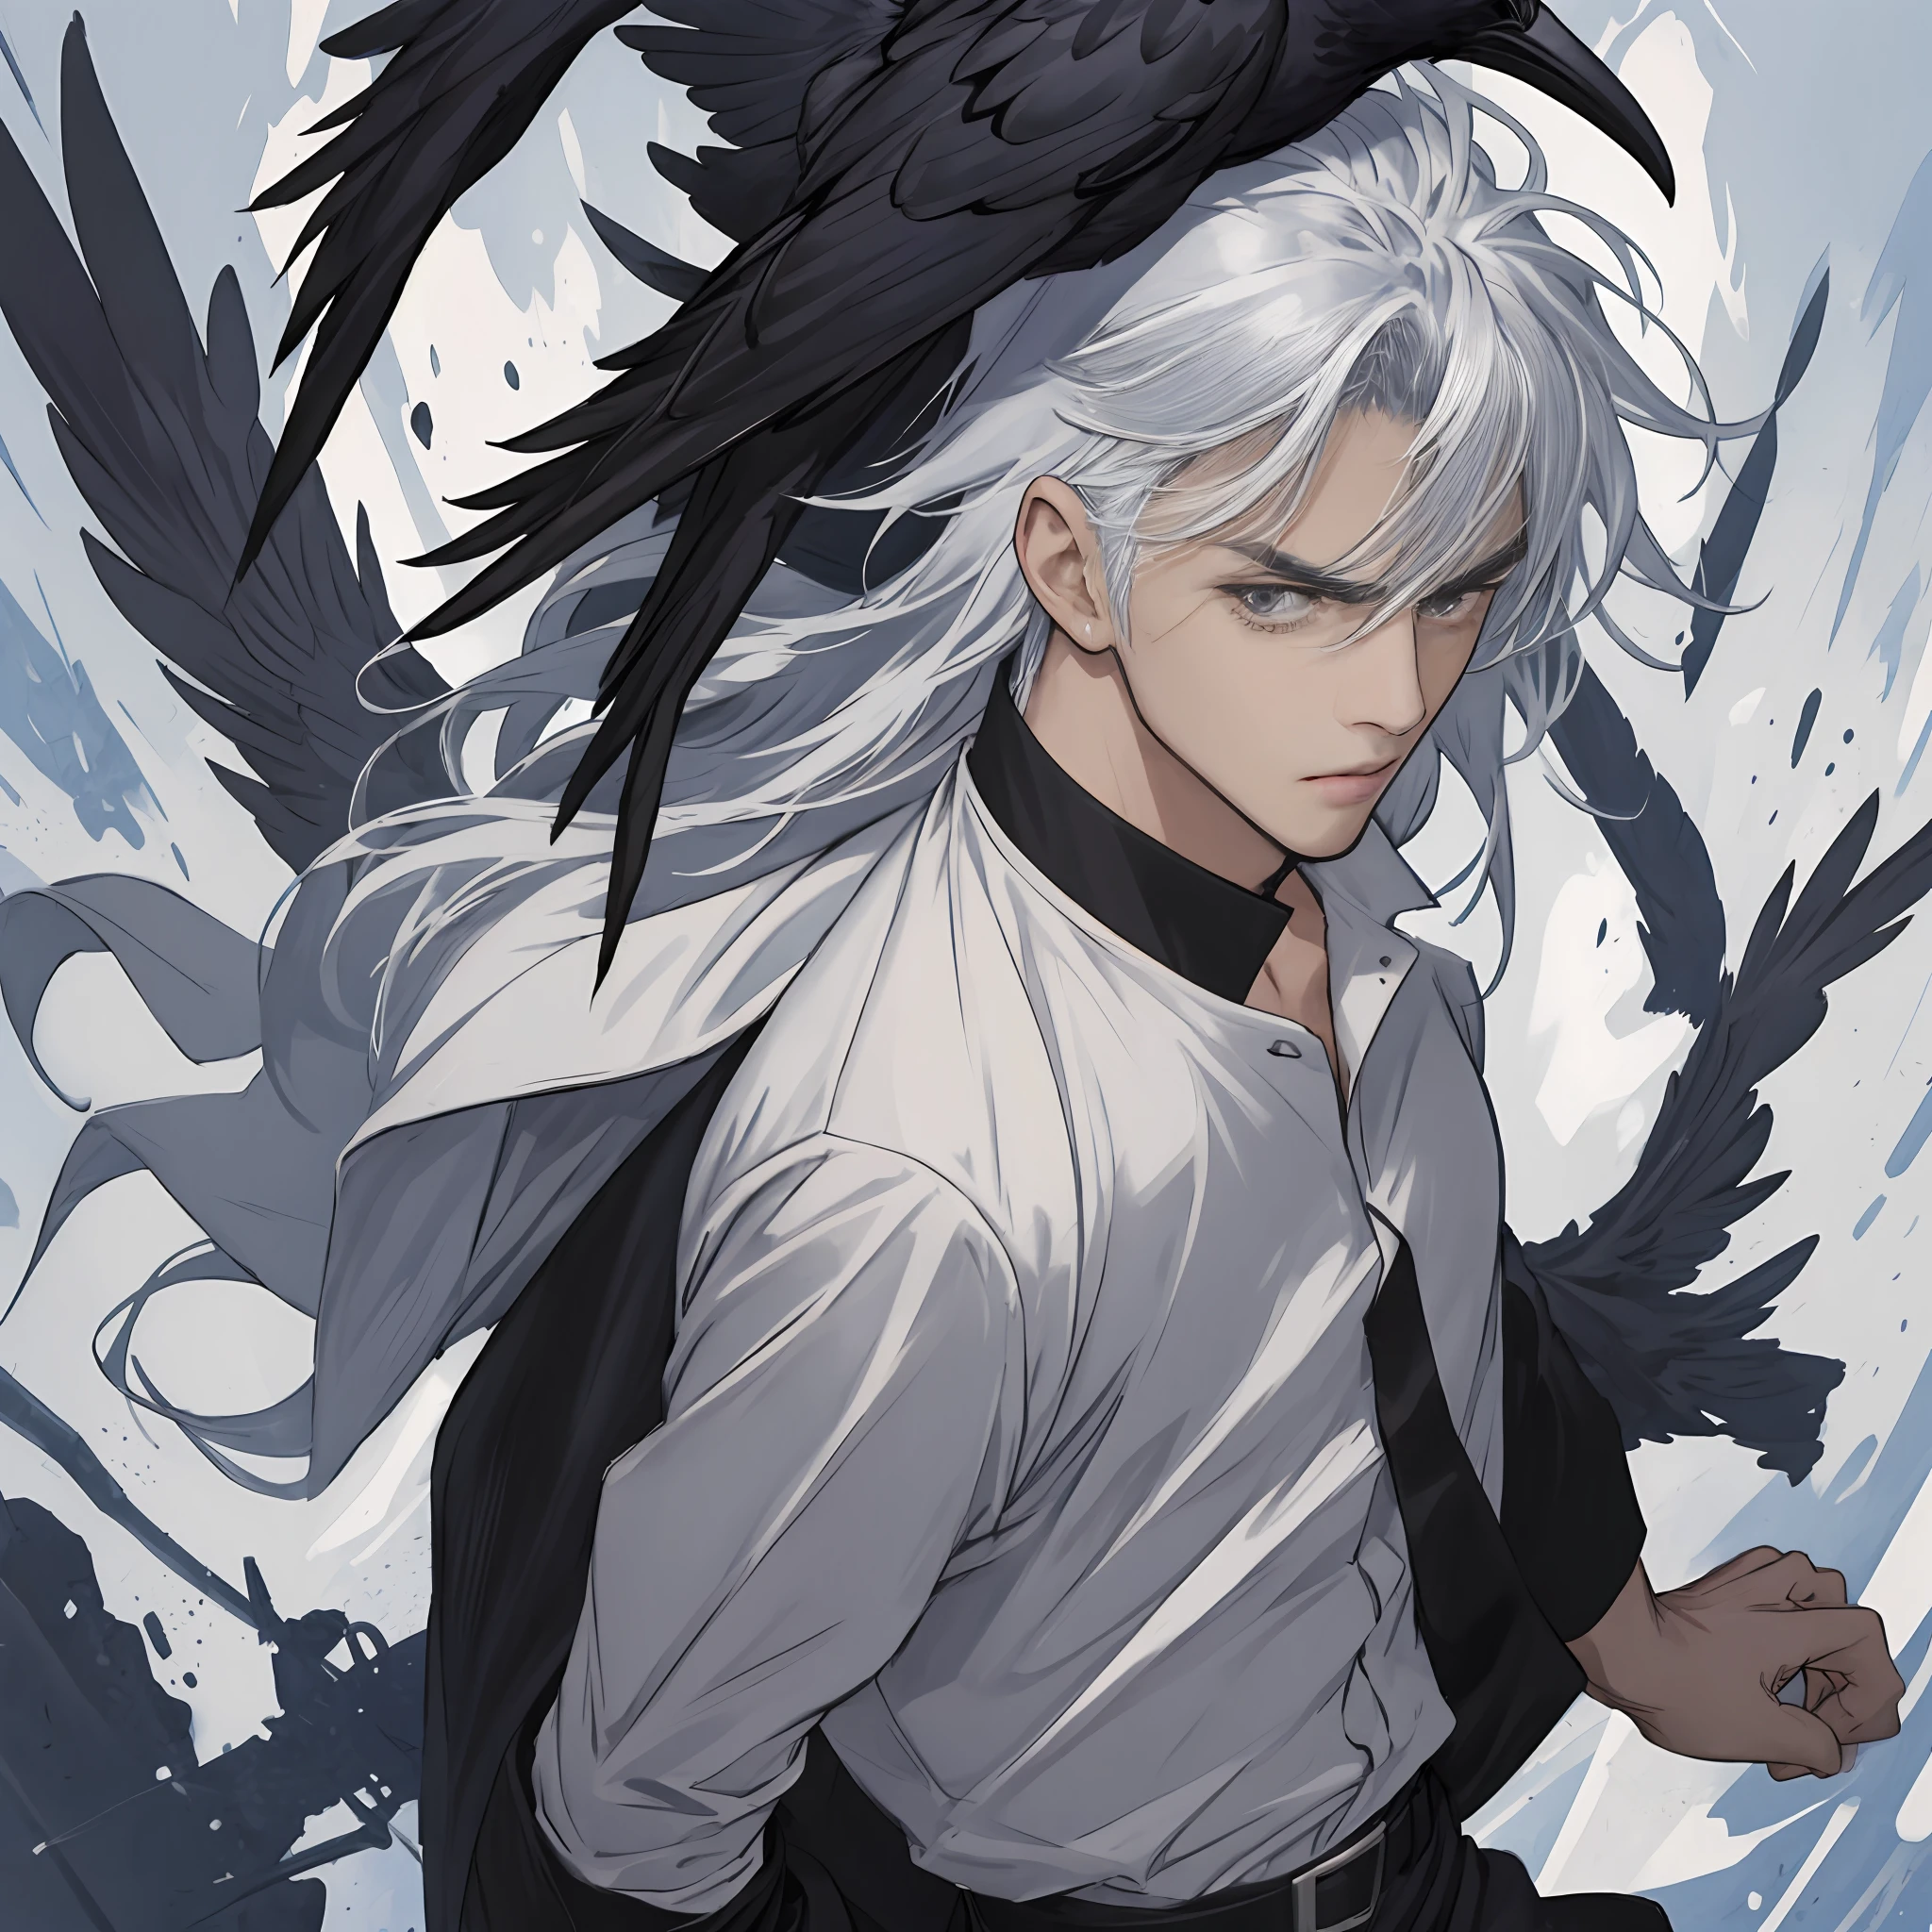 Anime male，Silver hair flowing，Handsome，Powerful，Black Crow